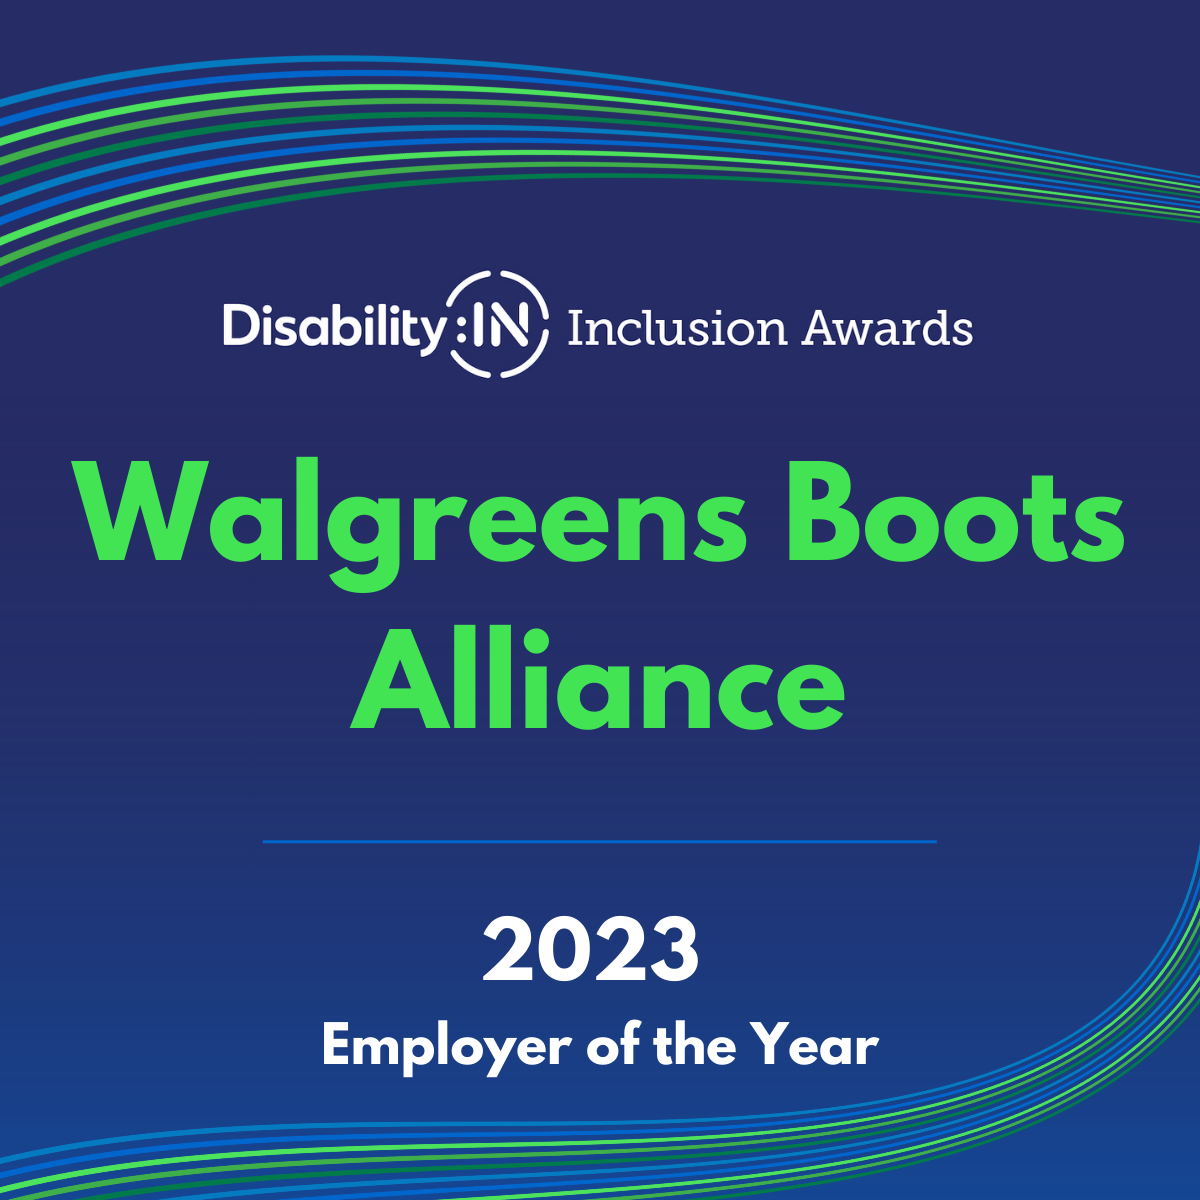 Employer of the Year 2023 - Walgreens Boots Alliance